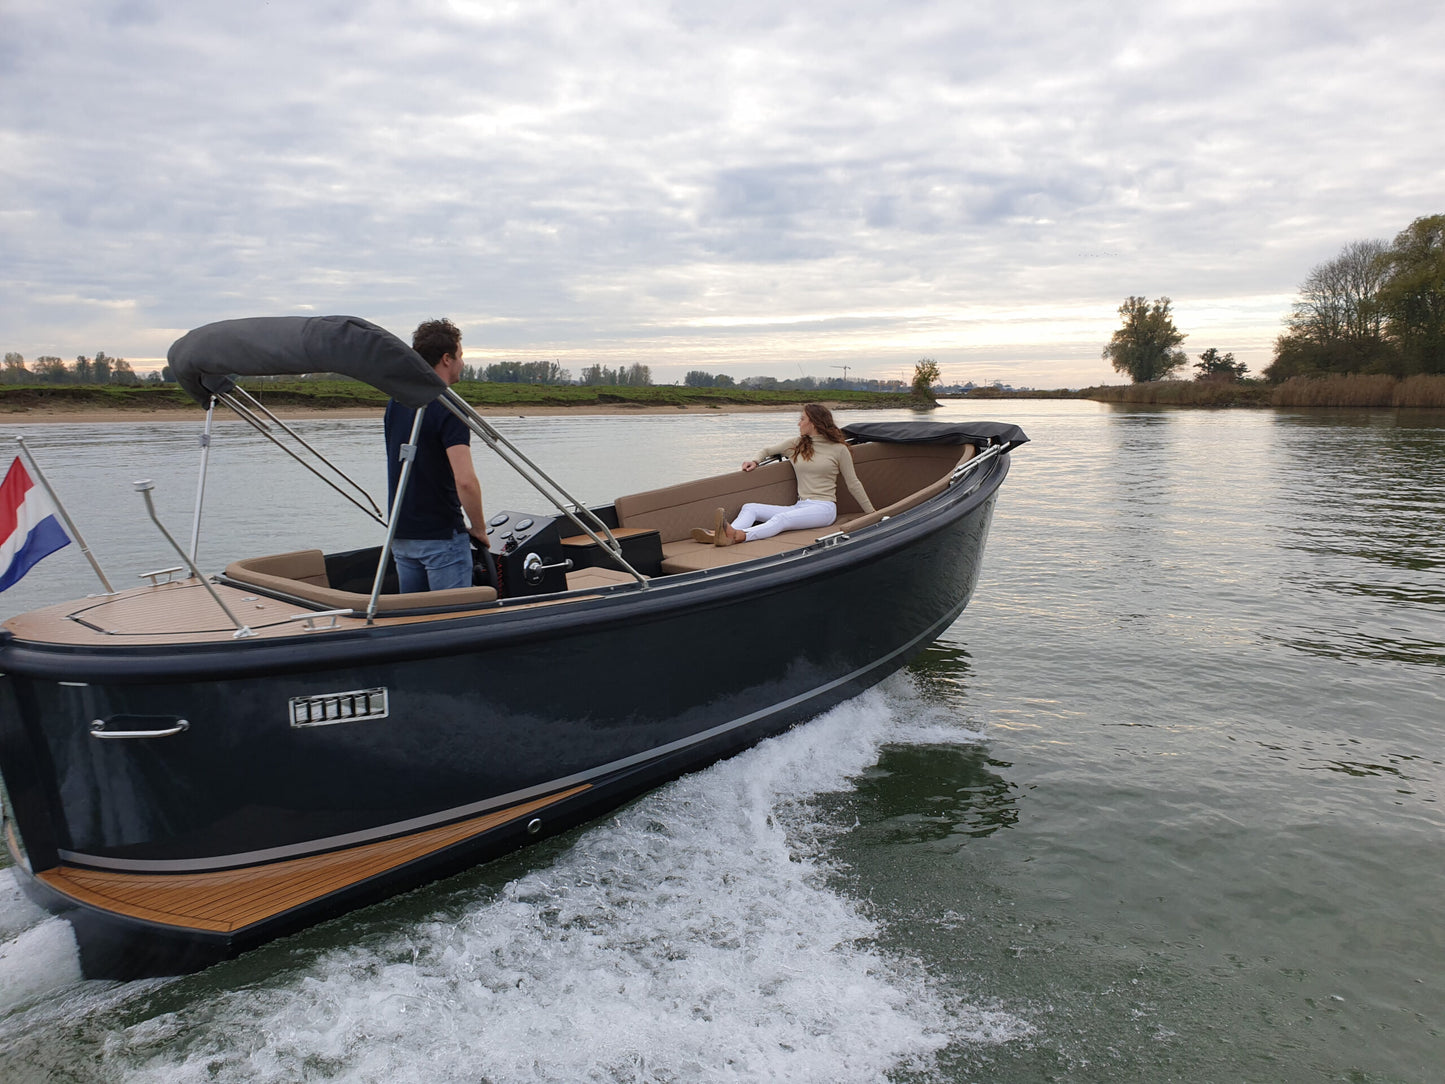 The Maxima 650 Flying Lounge - Base Boat Build from